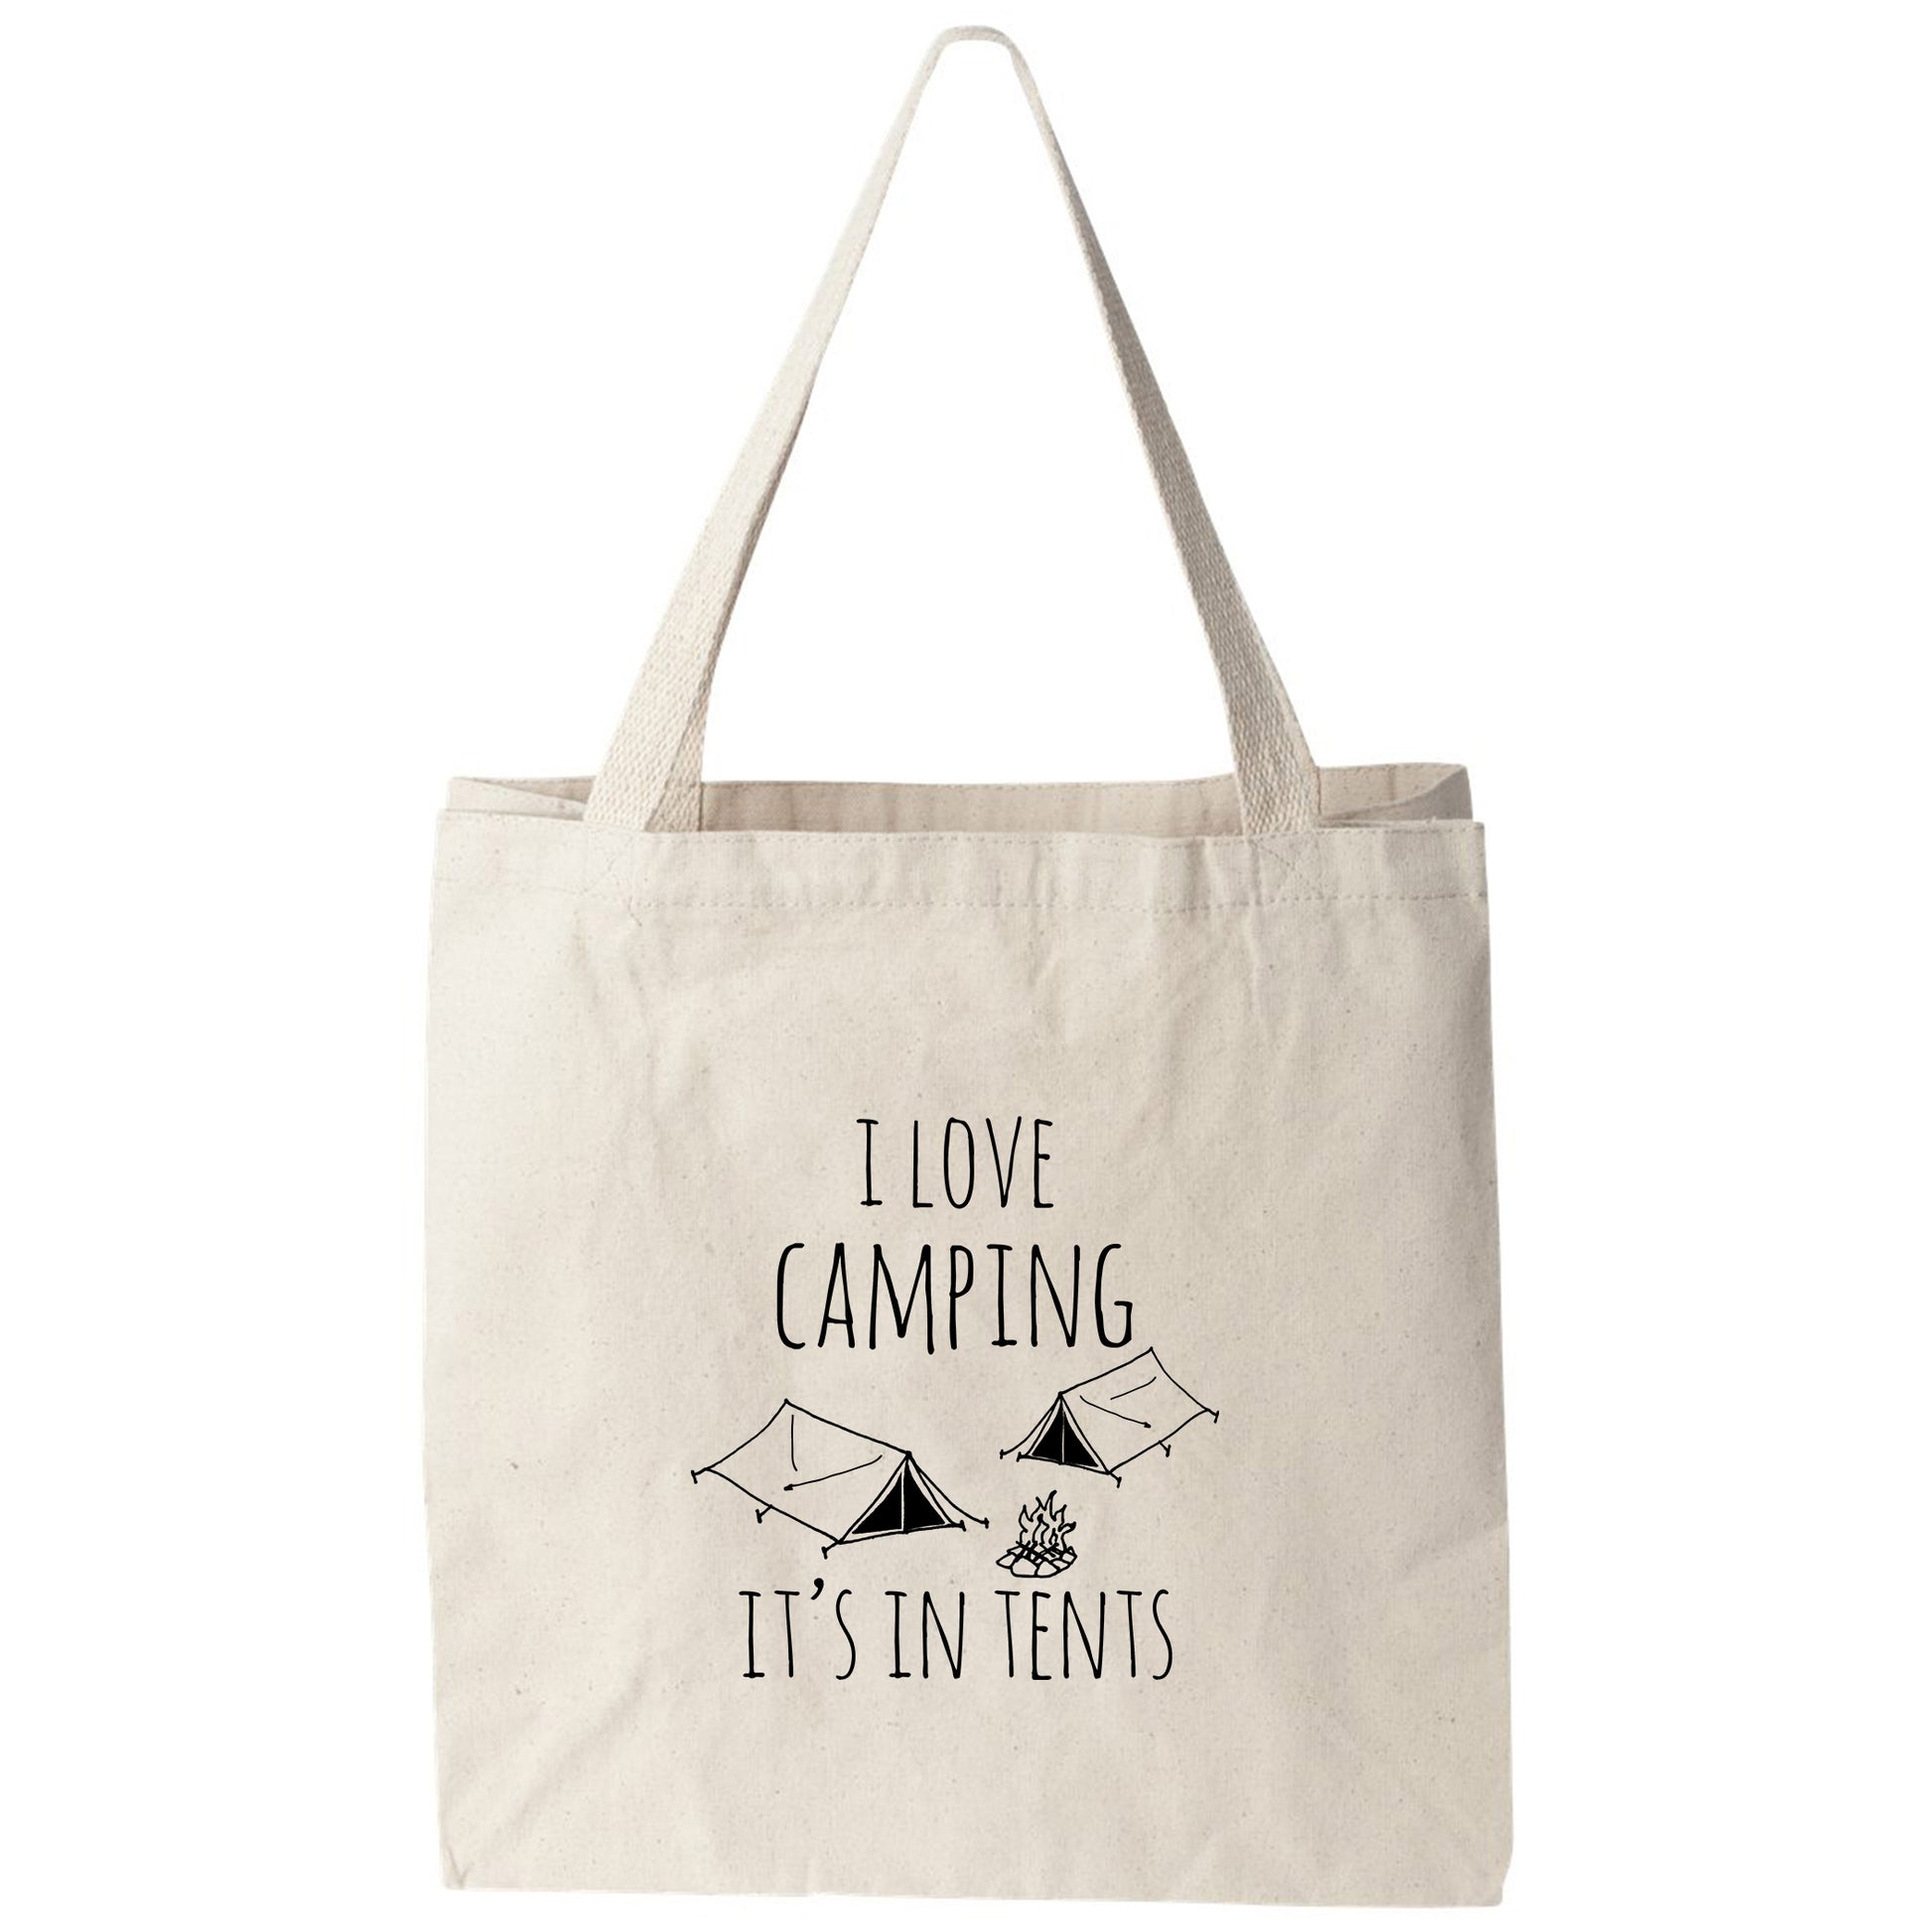 a tote bag that says love camping it's in tents